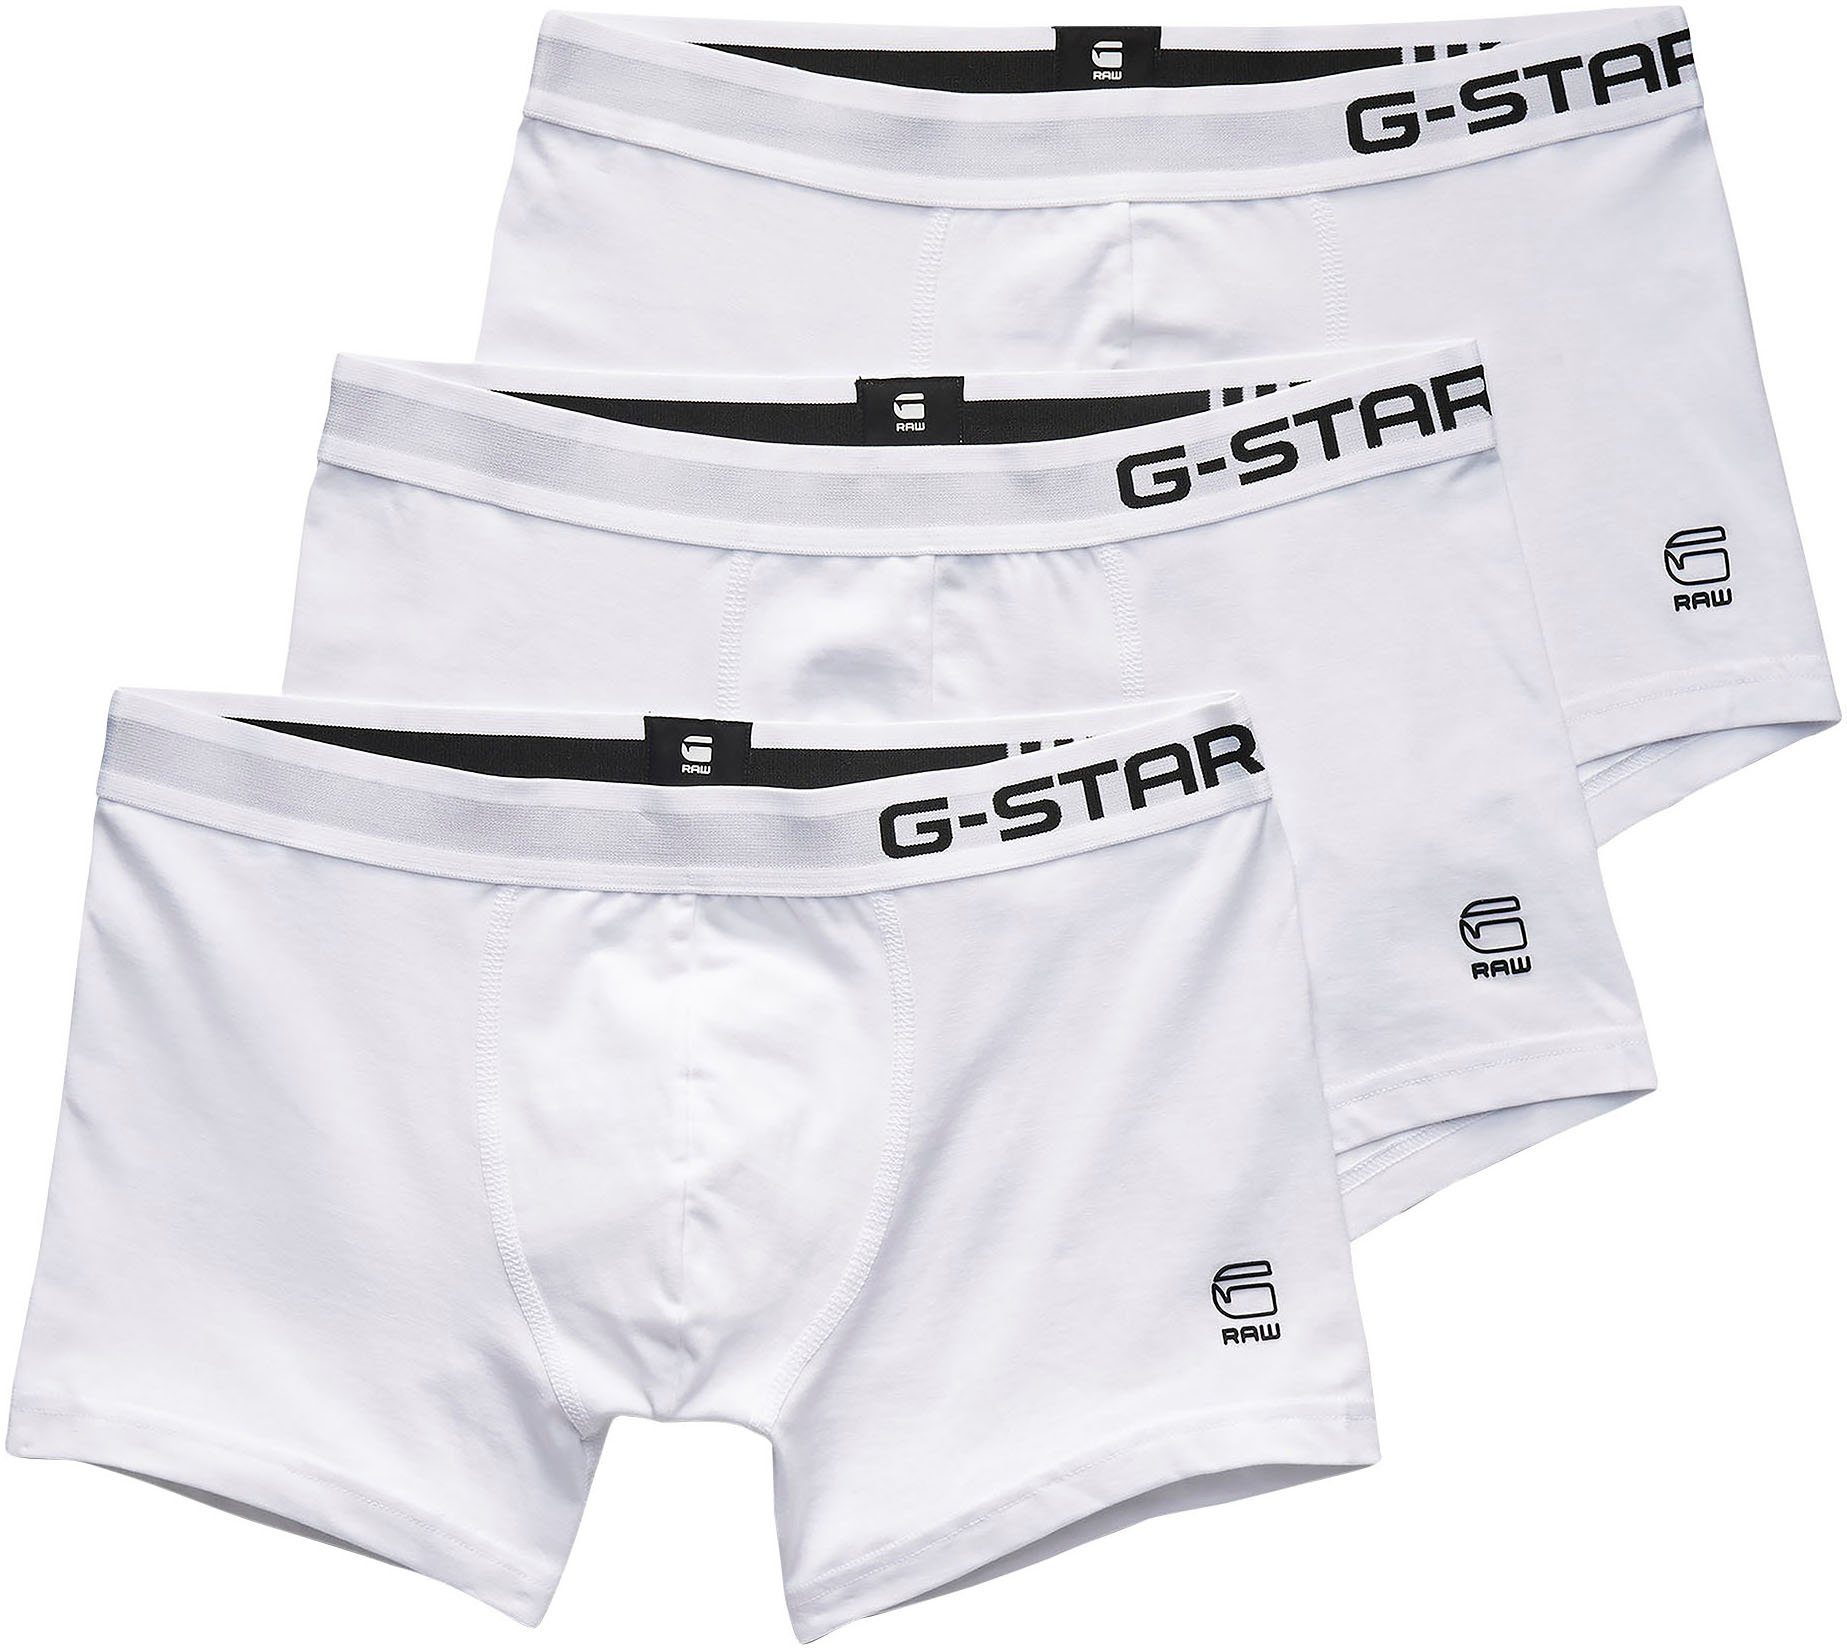 RAW Classic 3-St., trunk G-Star (Packung, 3 3er-Pack) weiß Boxer pack